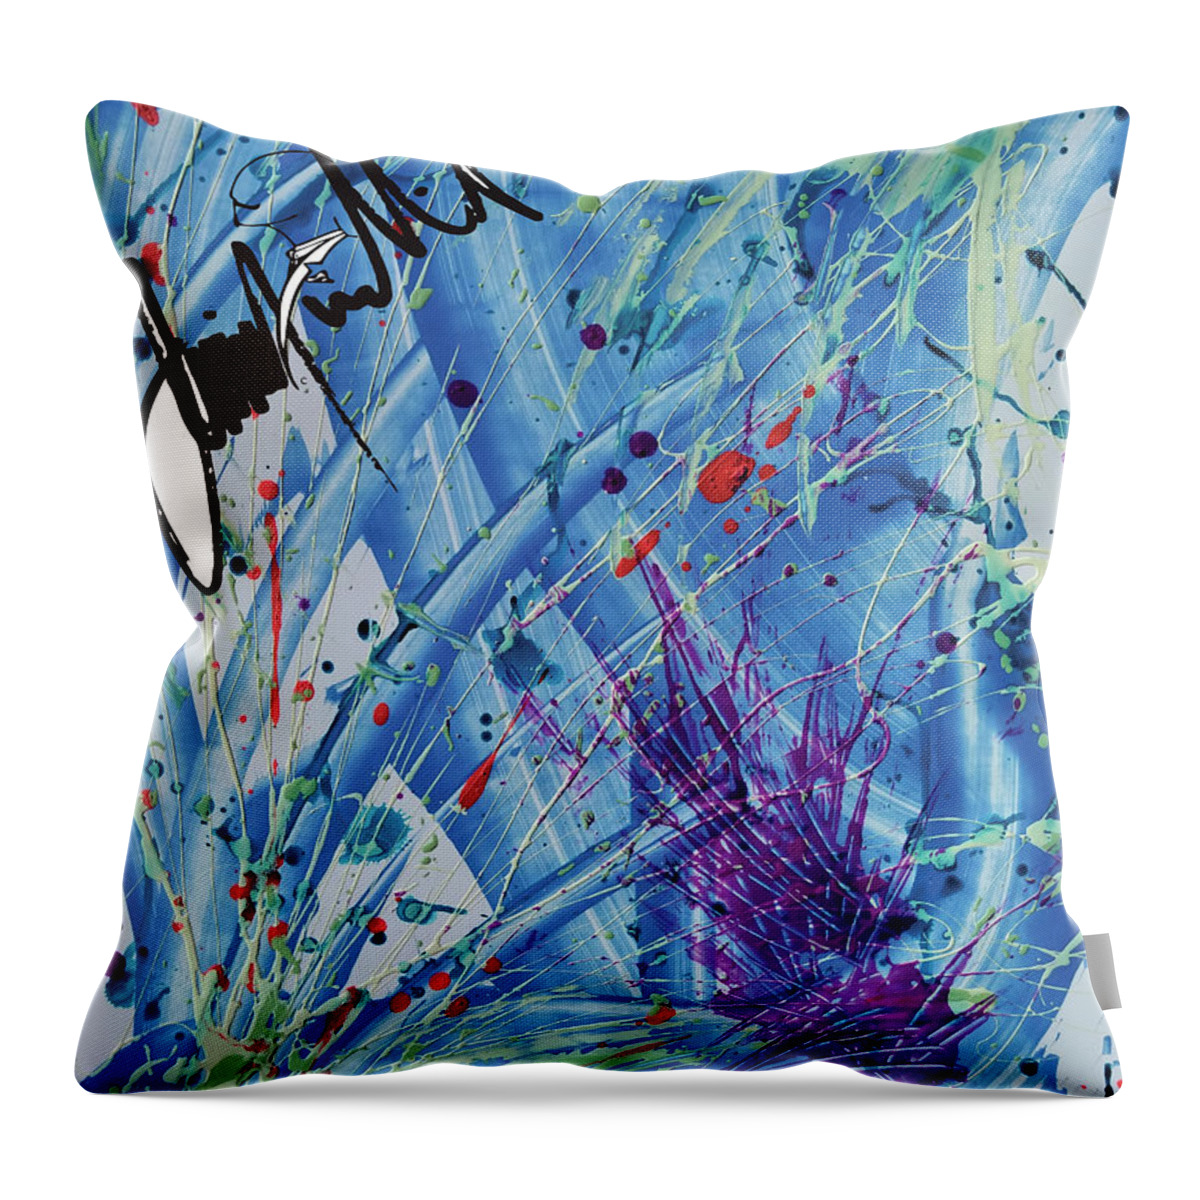  Throw Pillow featuring the digital art Dripdrop by Jimmy Williams